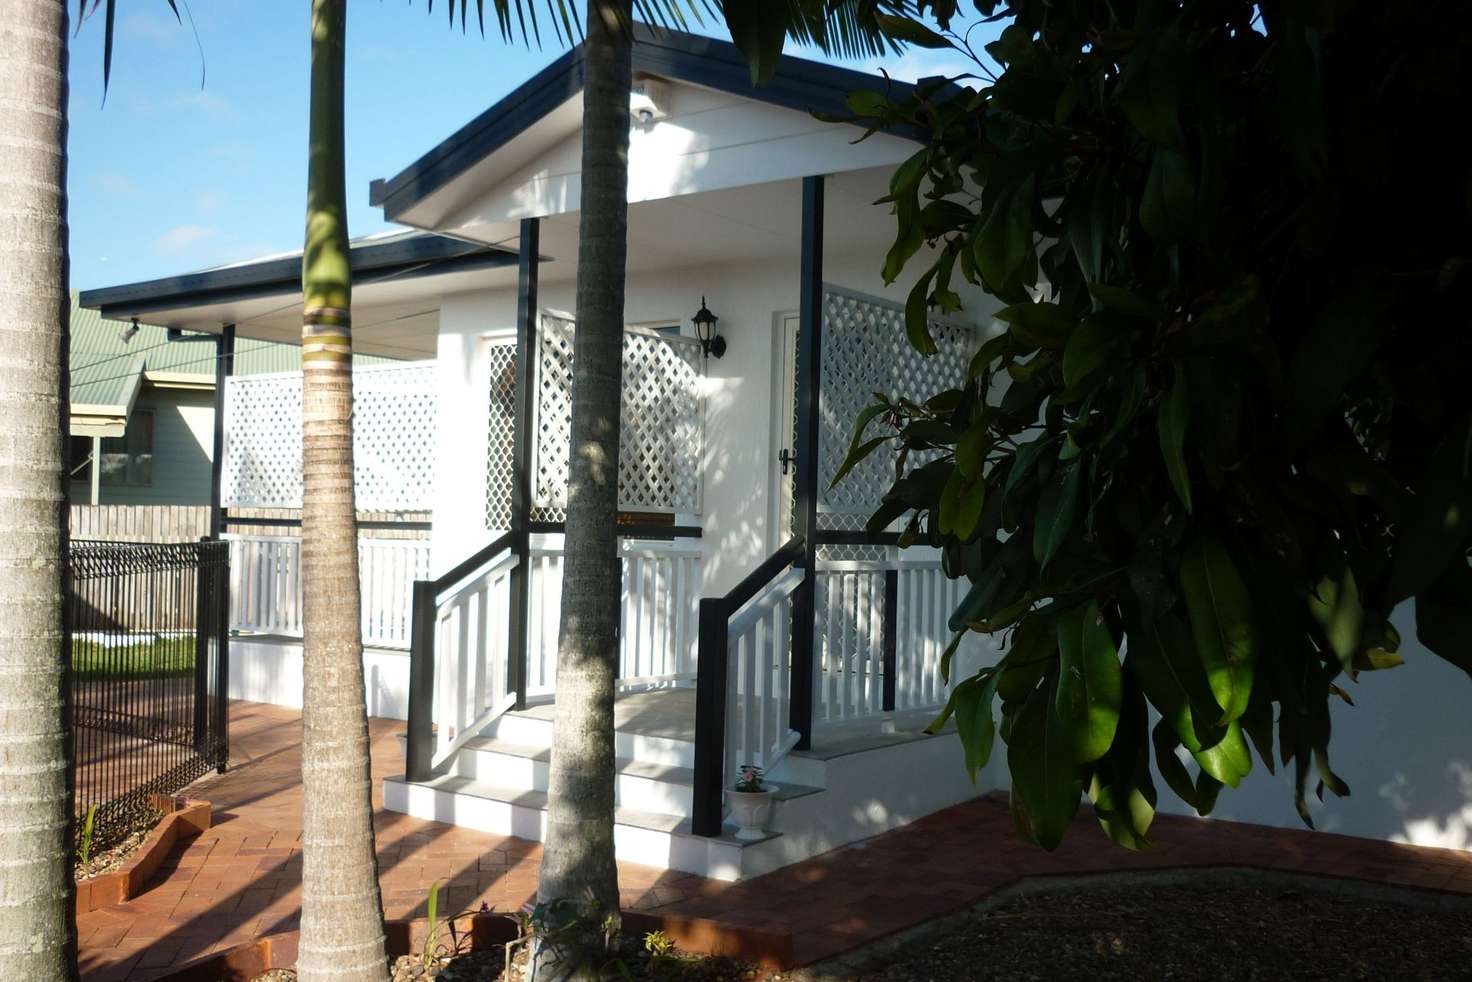 Main view of Homely house listing, 72 Hooper St, Belgian Gardens QLD 4810